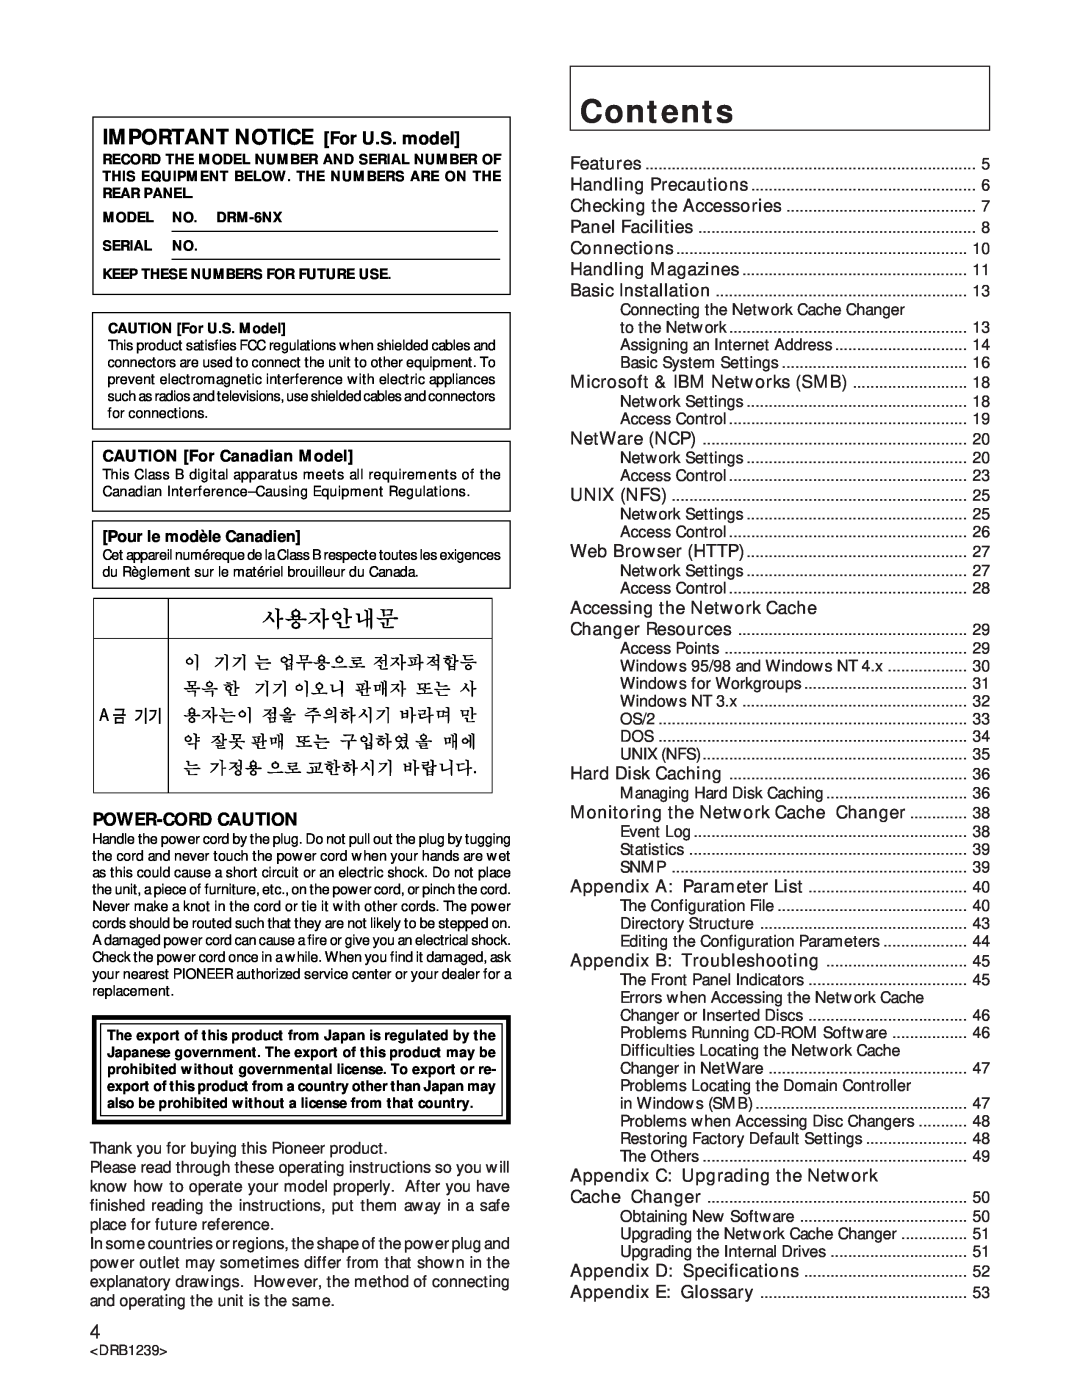 Pioneer DRM-6NX manual Contents, IMPORTANT NOTICE For U.S. model, Power-Cord Caution, CAUTION For Canadian Model 